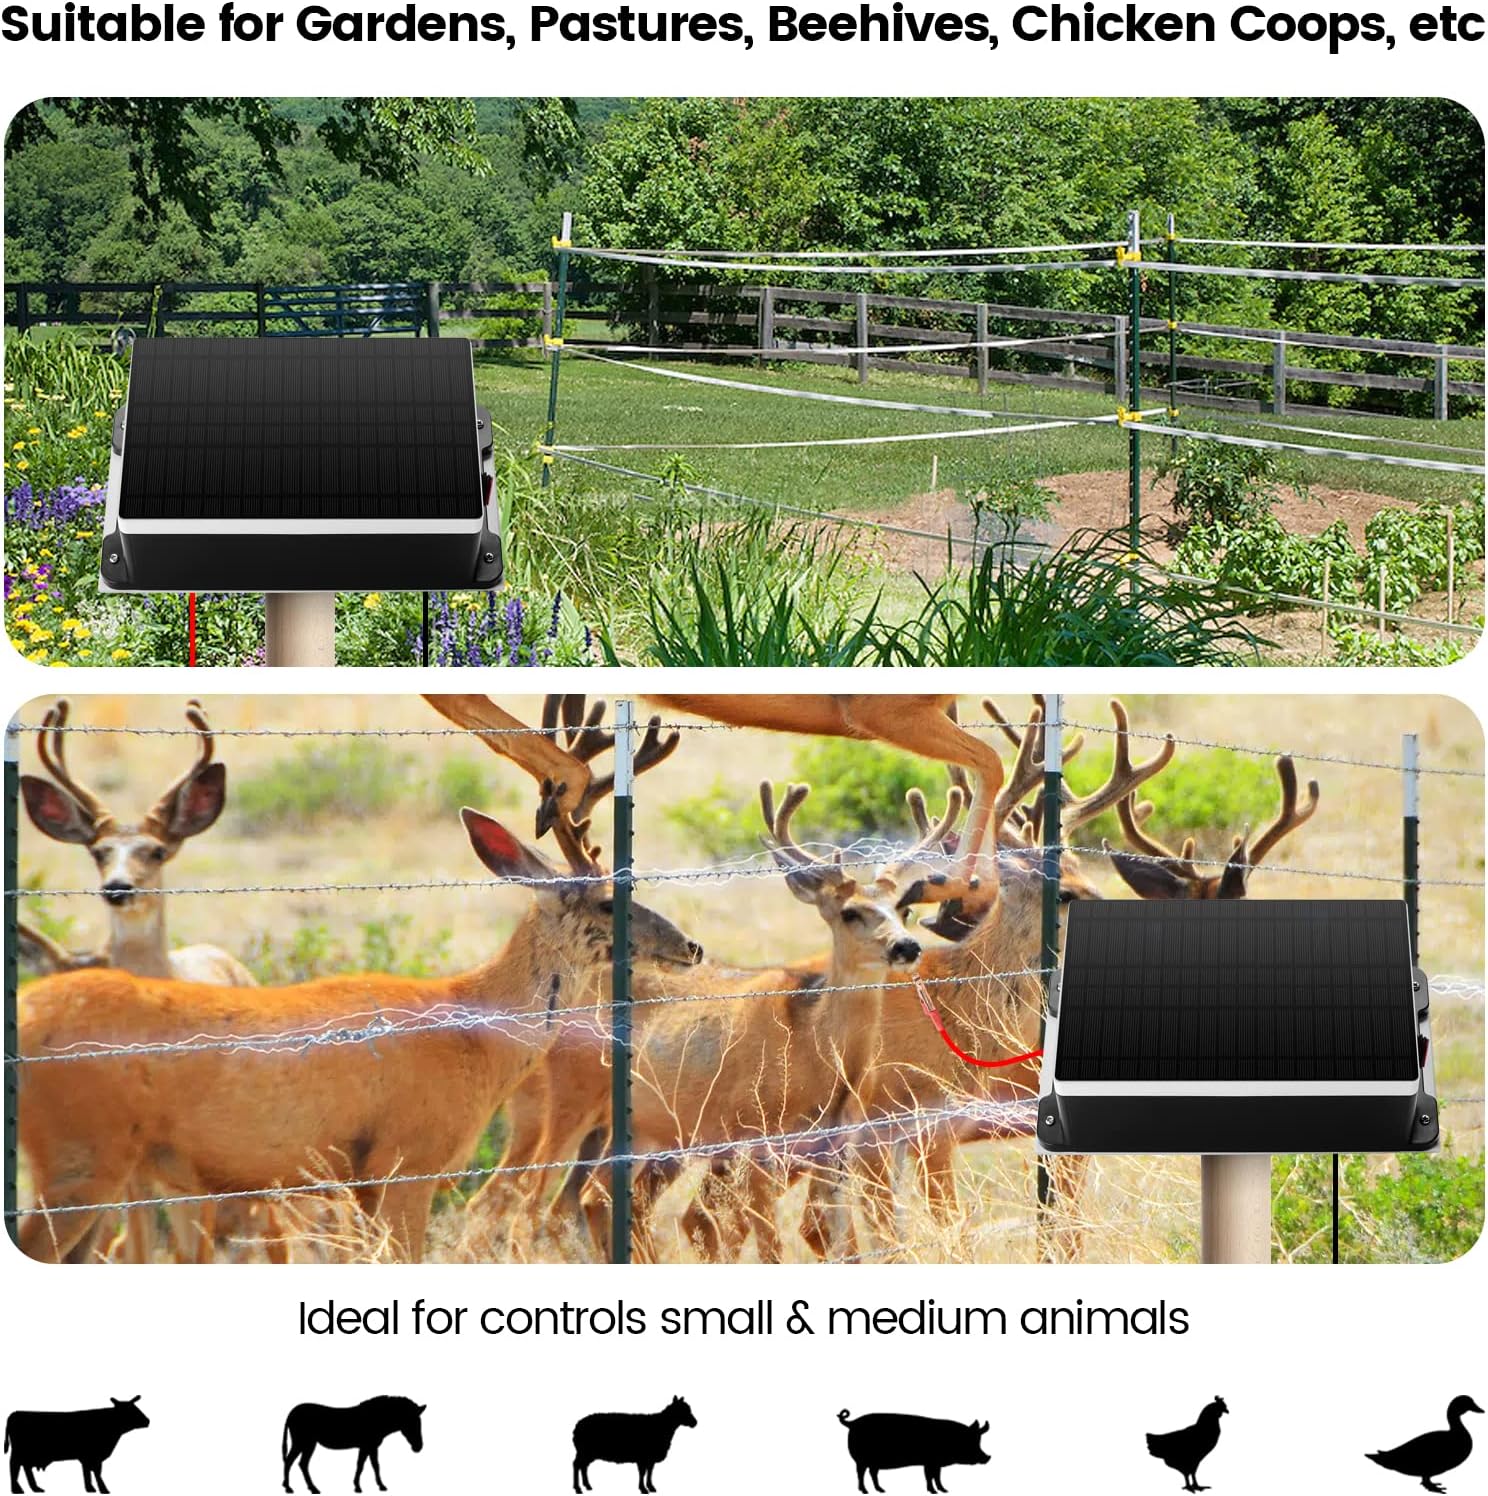 Solar Fence Charger, Briidea 5.6 Miles Solar Electric Fence Charger, 0.2 Joules, Protect Your Livestock Garden Pasture from Wildlife, IP66 Waterproof